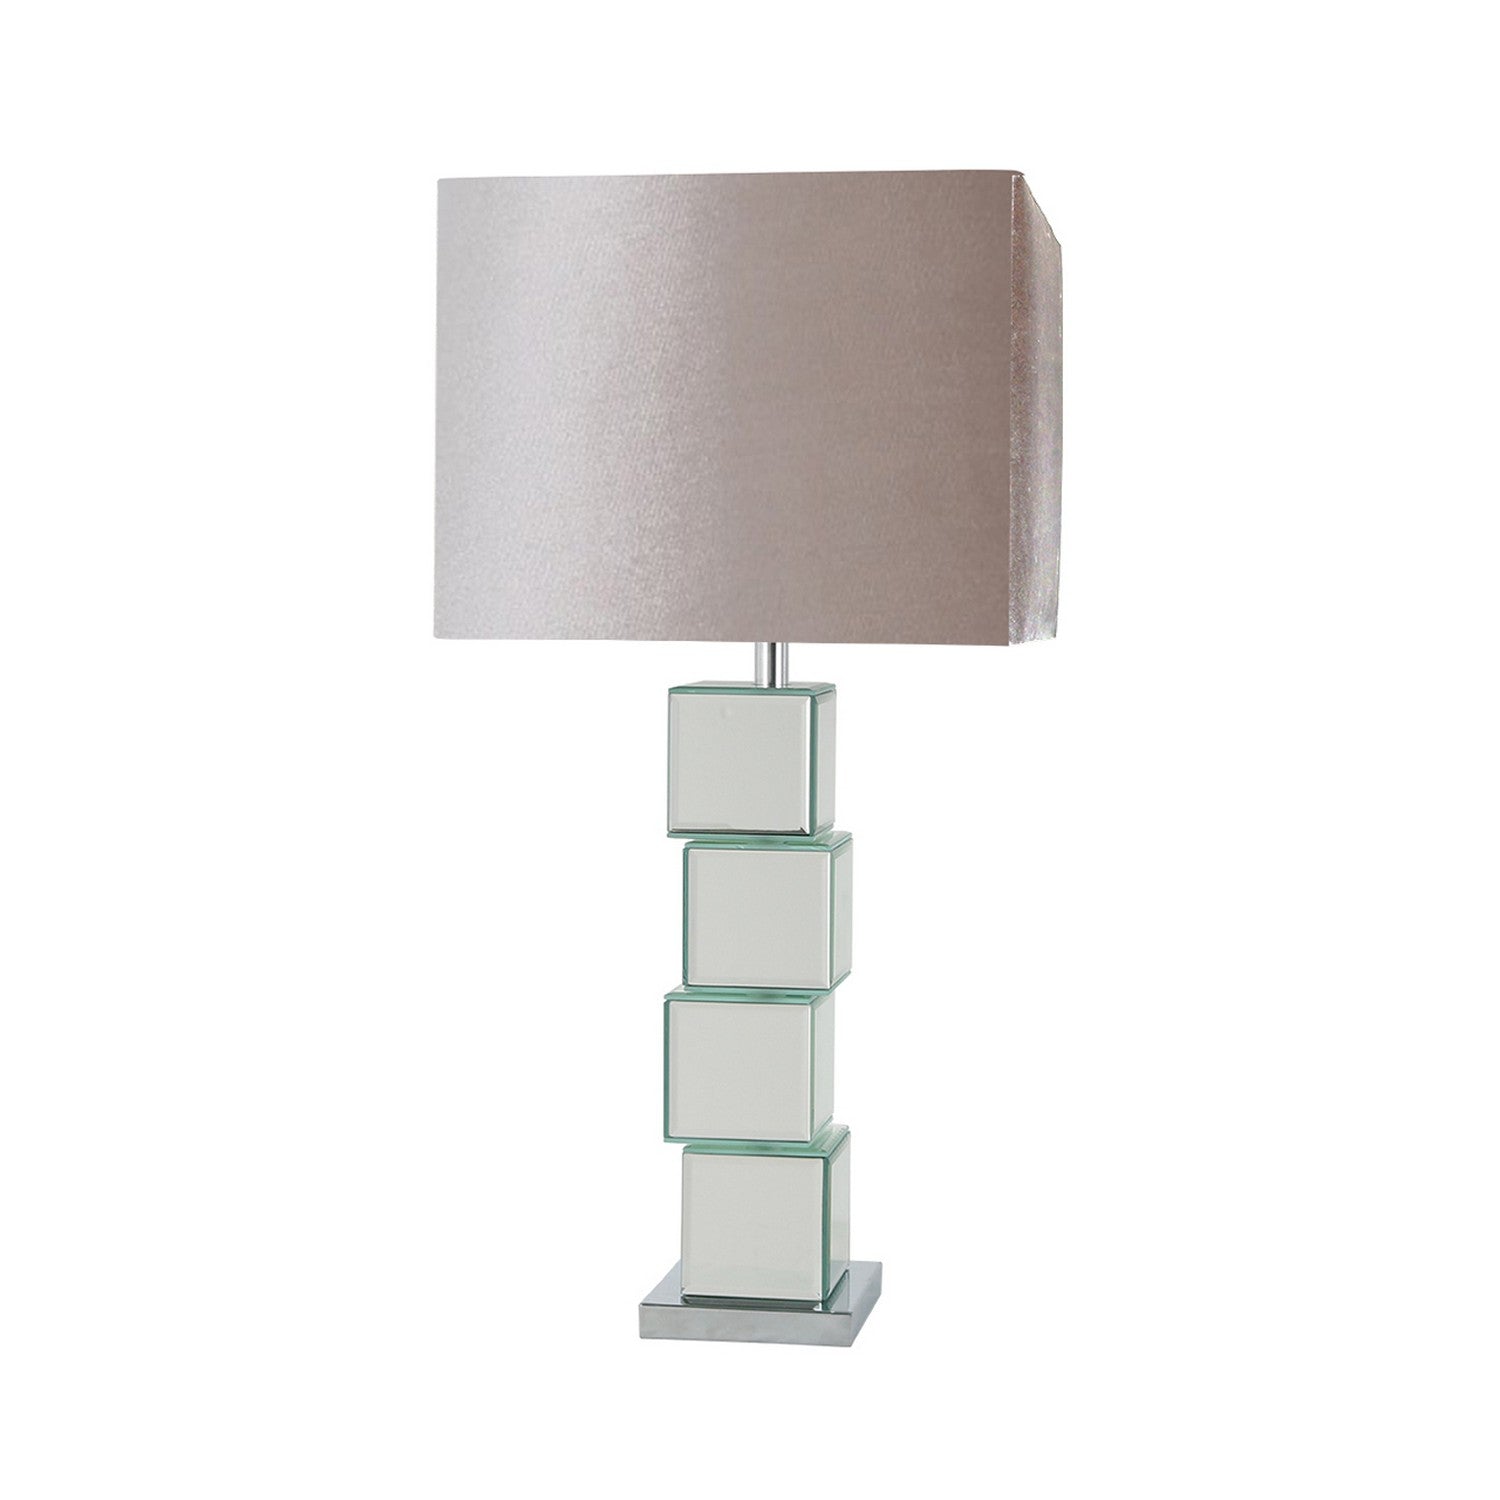 Block Design Mirror Table Lamp with Champagne Shade